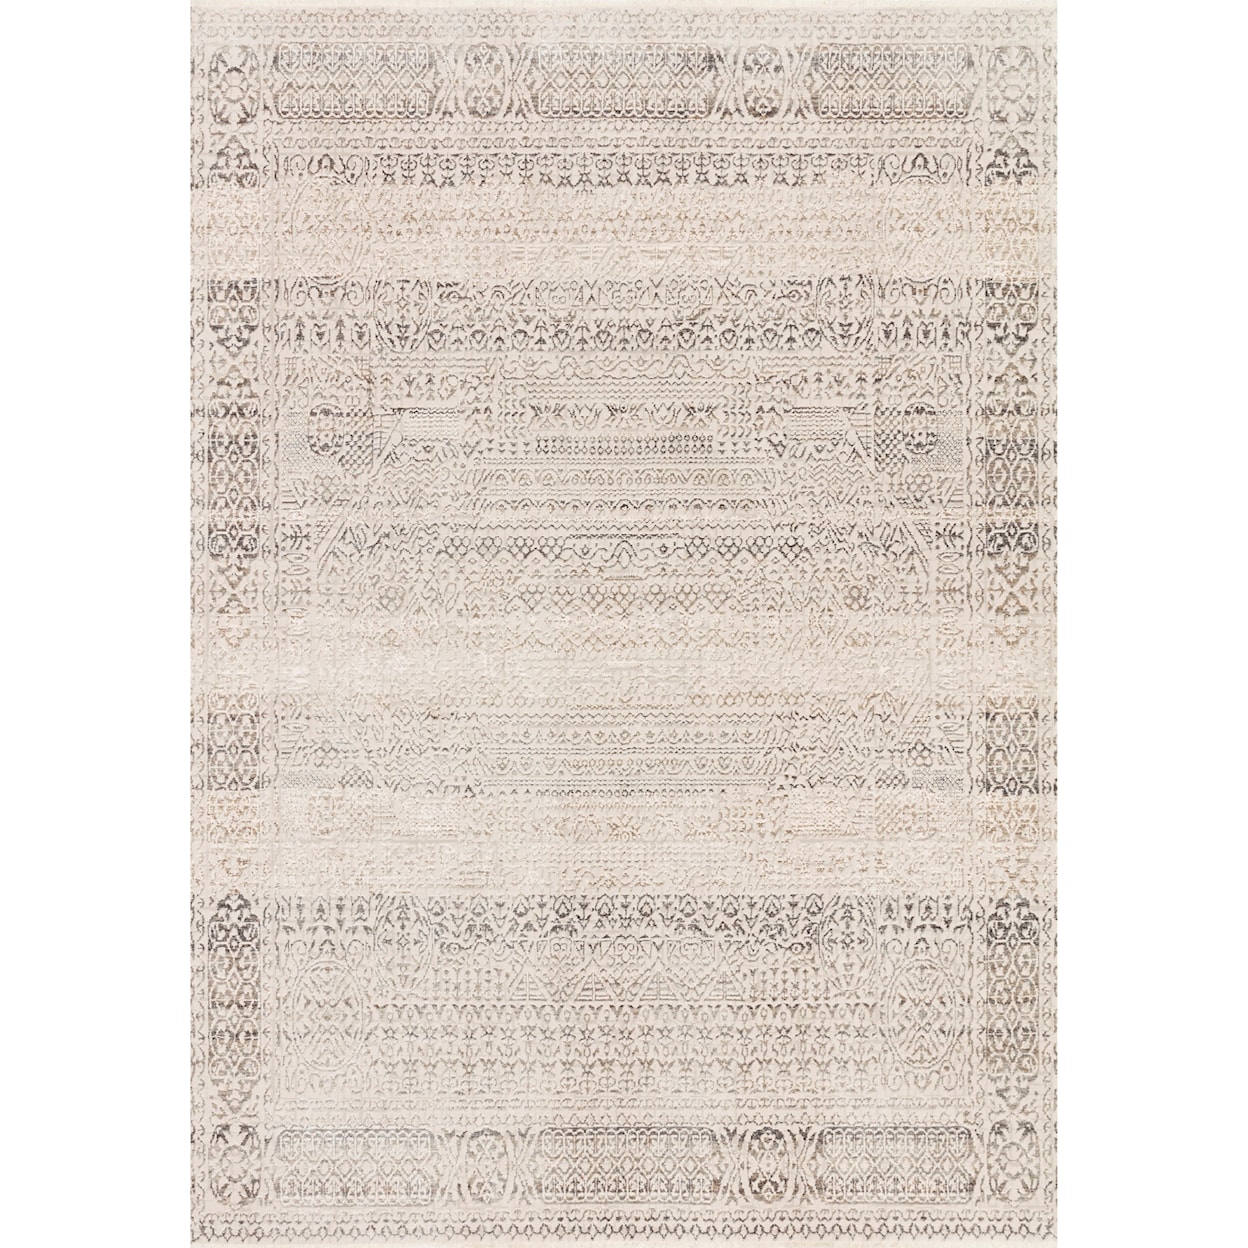 Reeds Rugs Homage 7'10" x 10' Ivory / Silver Rug